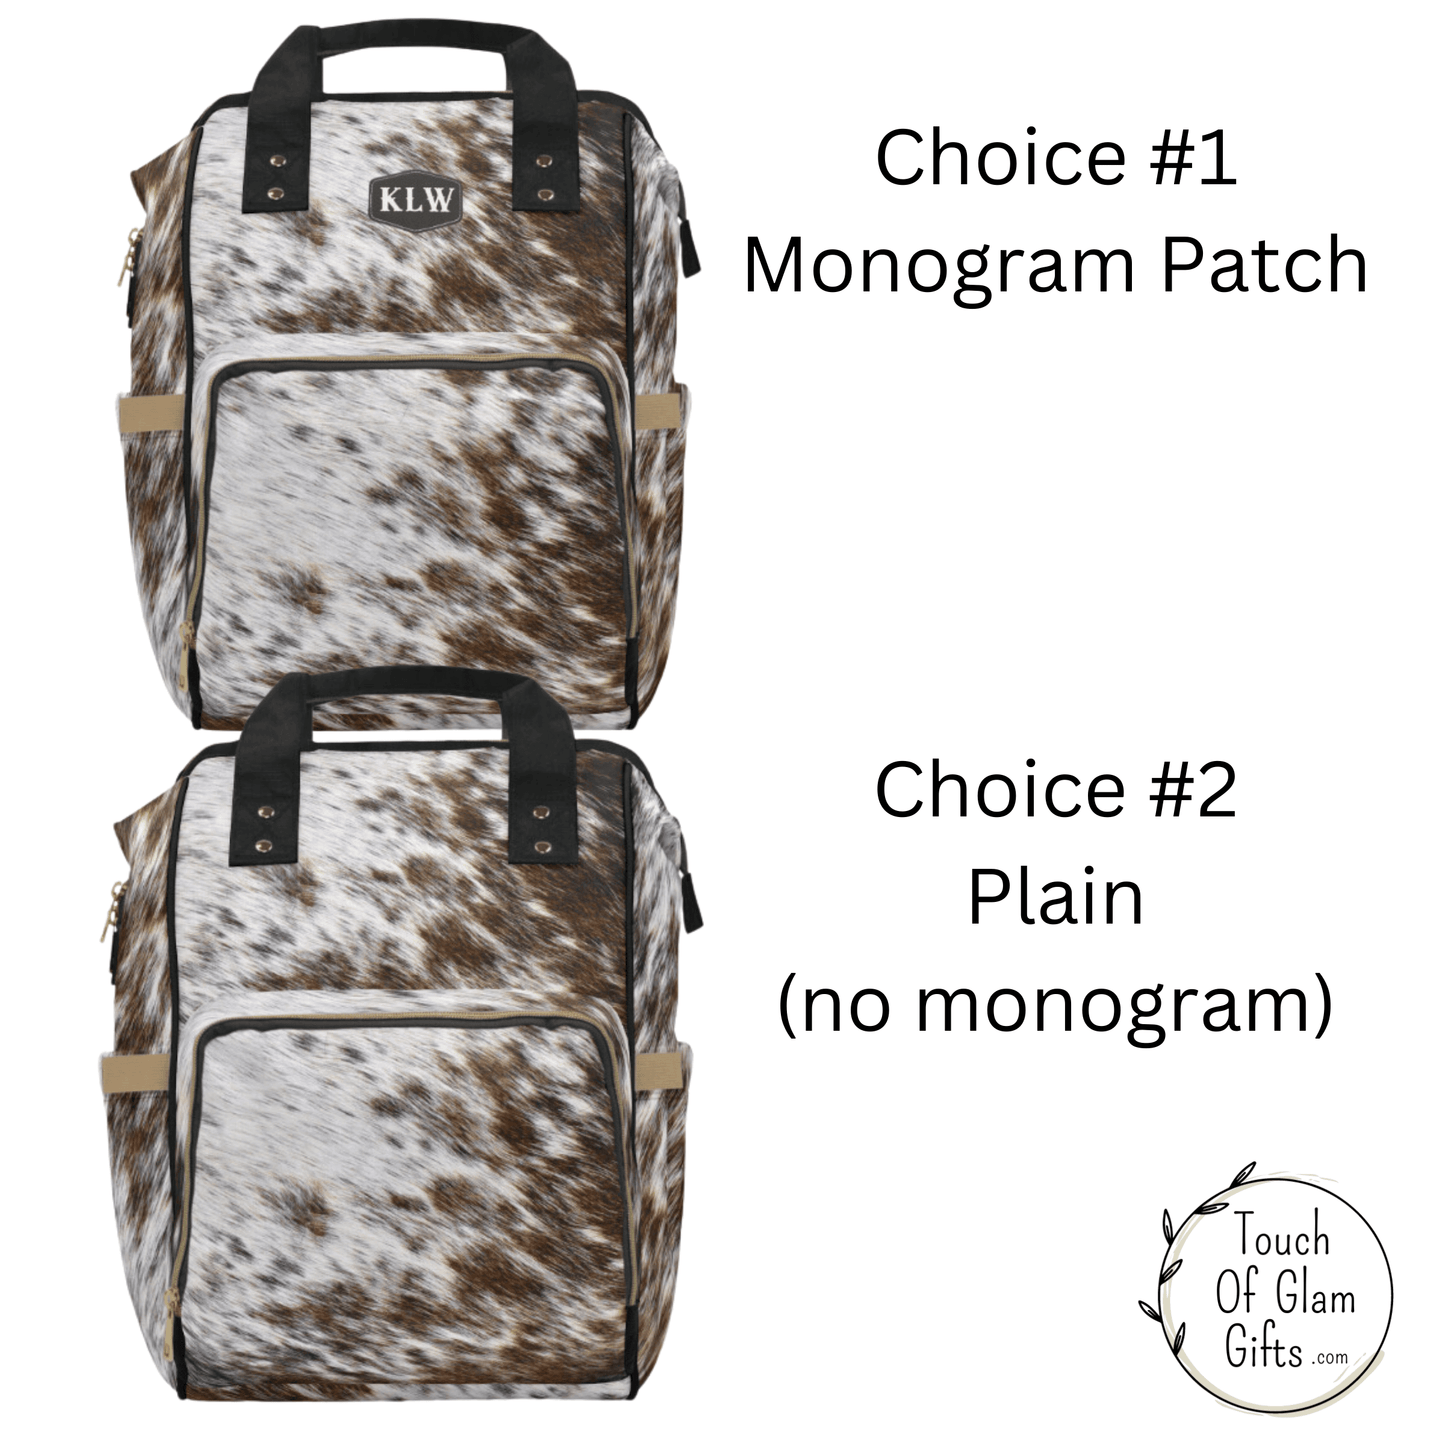 Our diaper backpack can be monogrammed or enjoyed plain as shown in the choices in pictures.